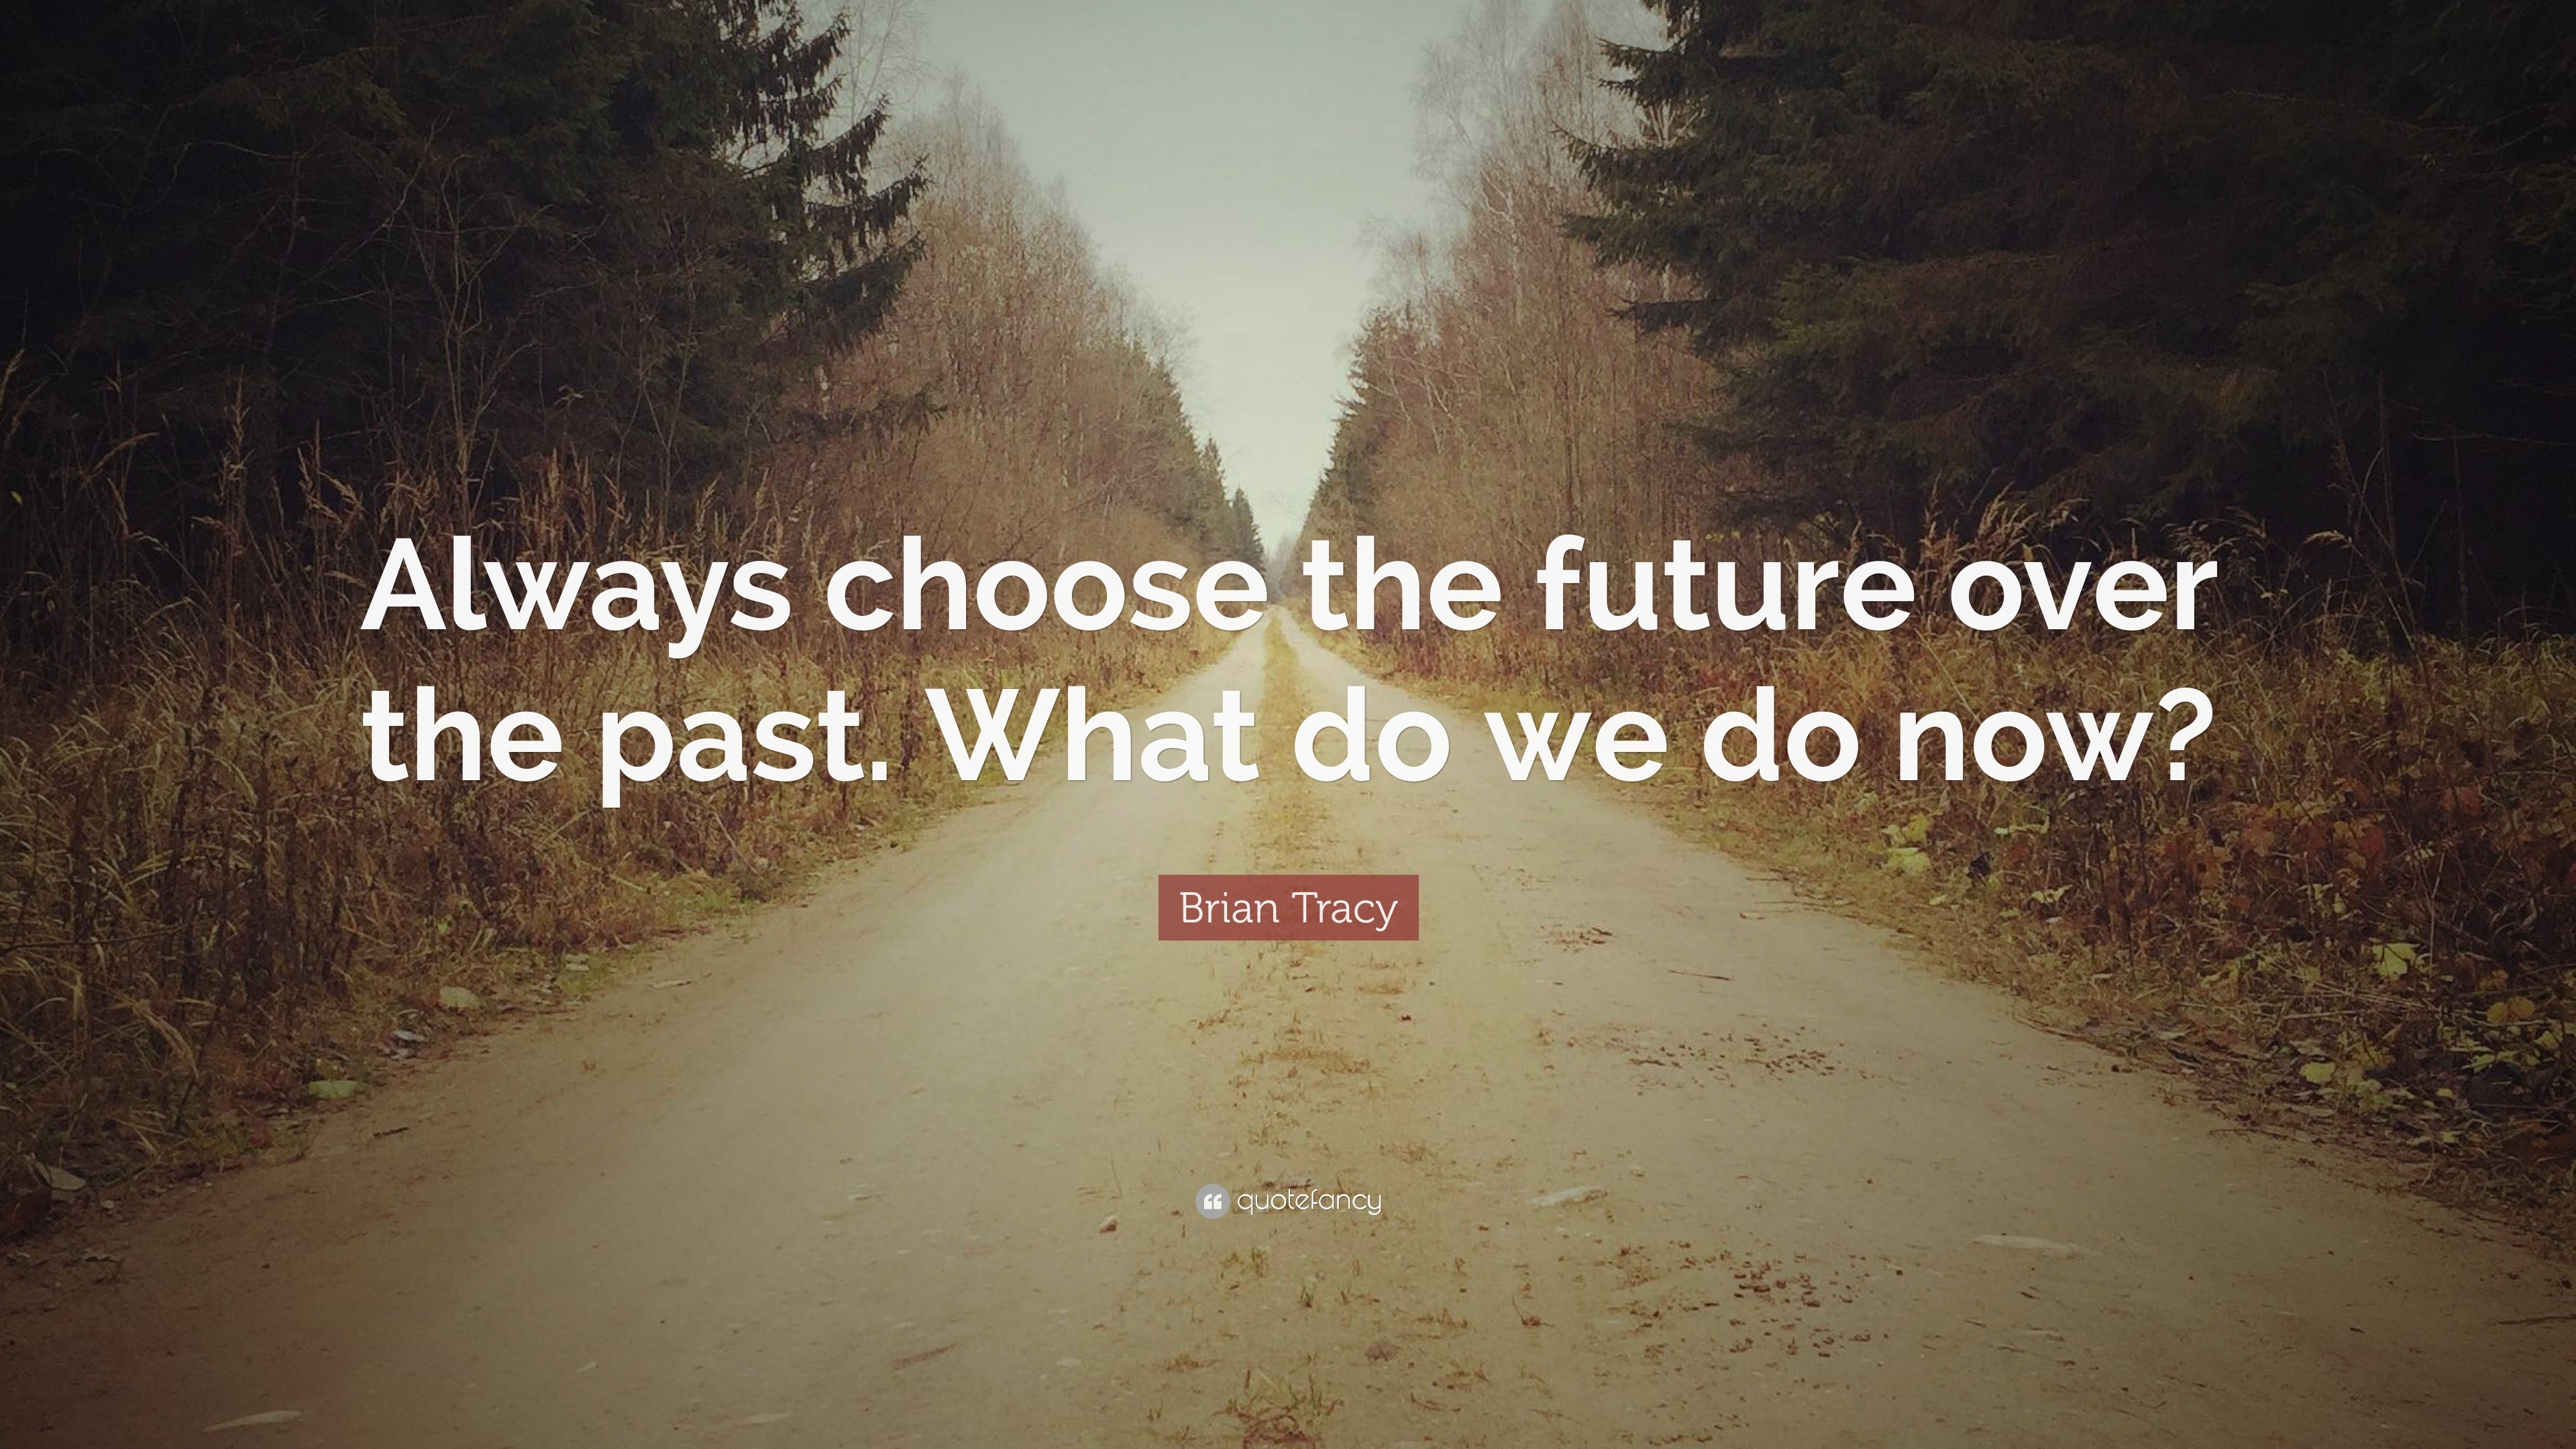 Brian Tracy Quote “always Choose The Future Over The Past What Do We